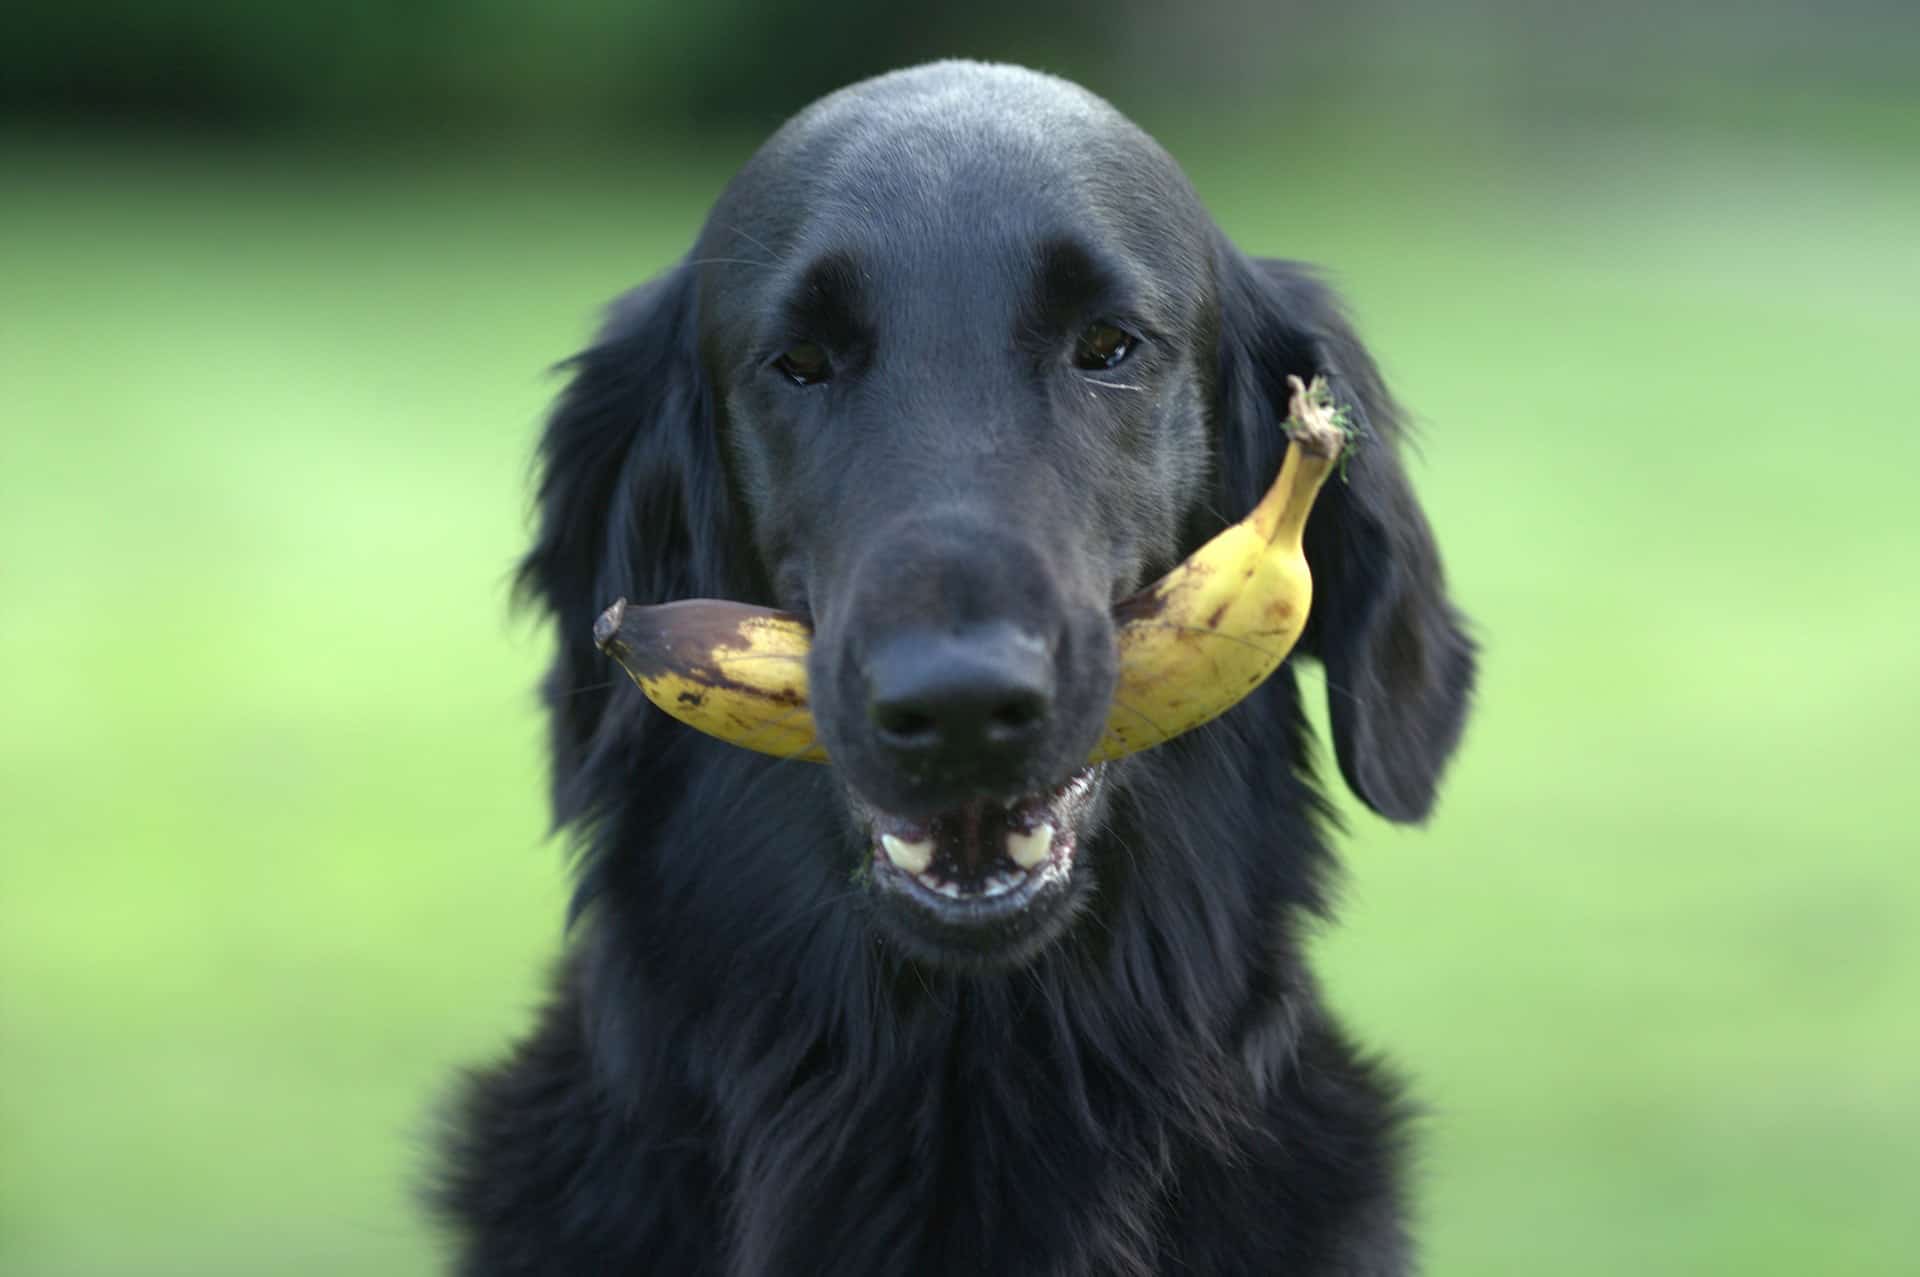 Can Dogs Eat Fruit